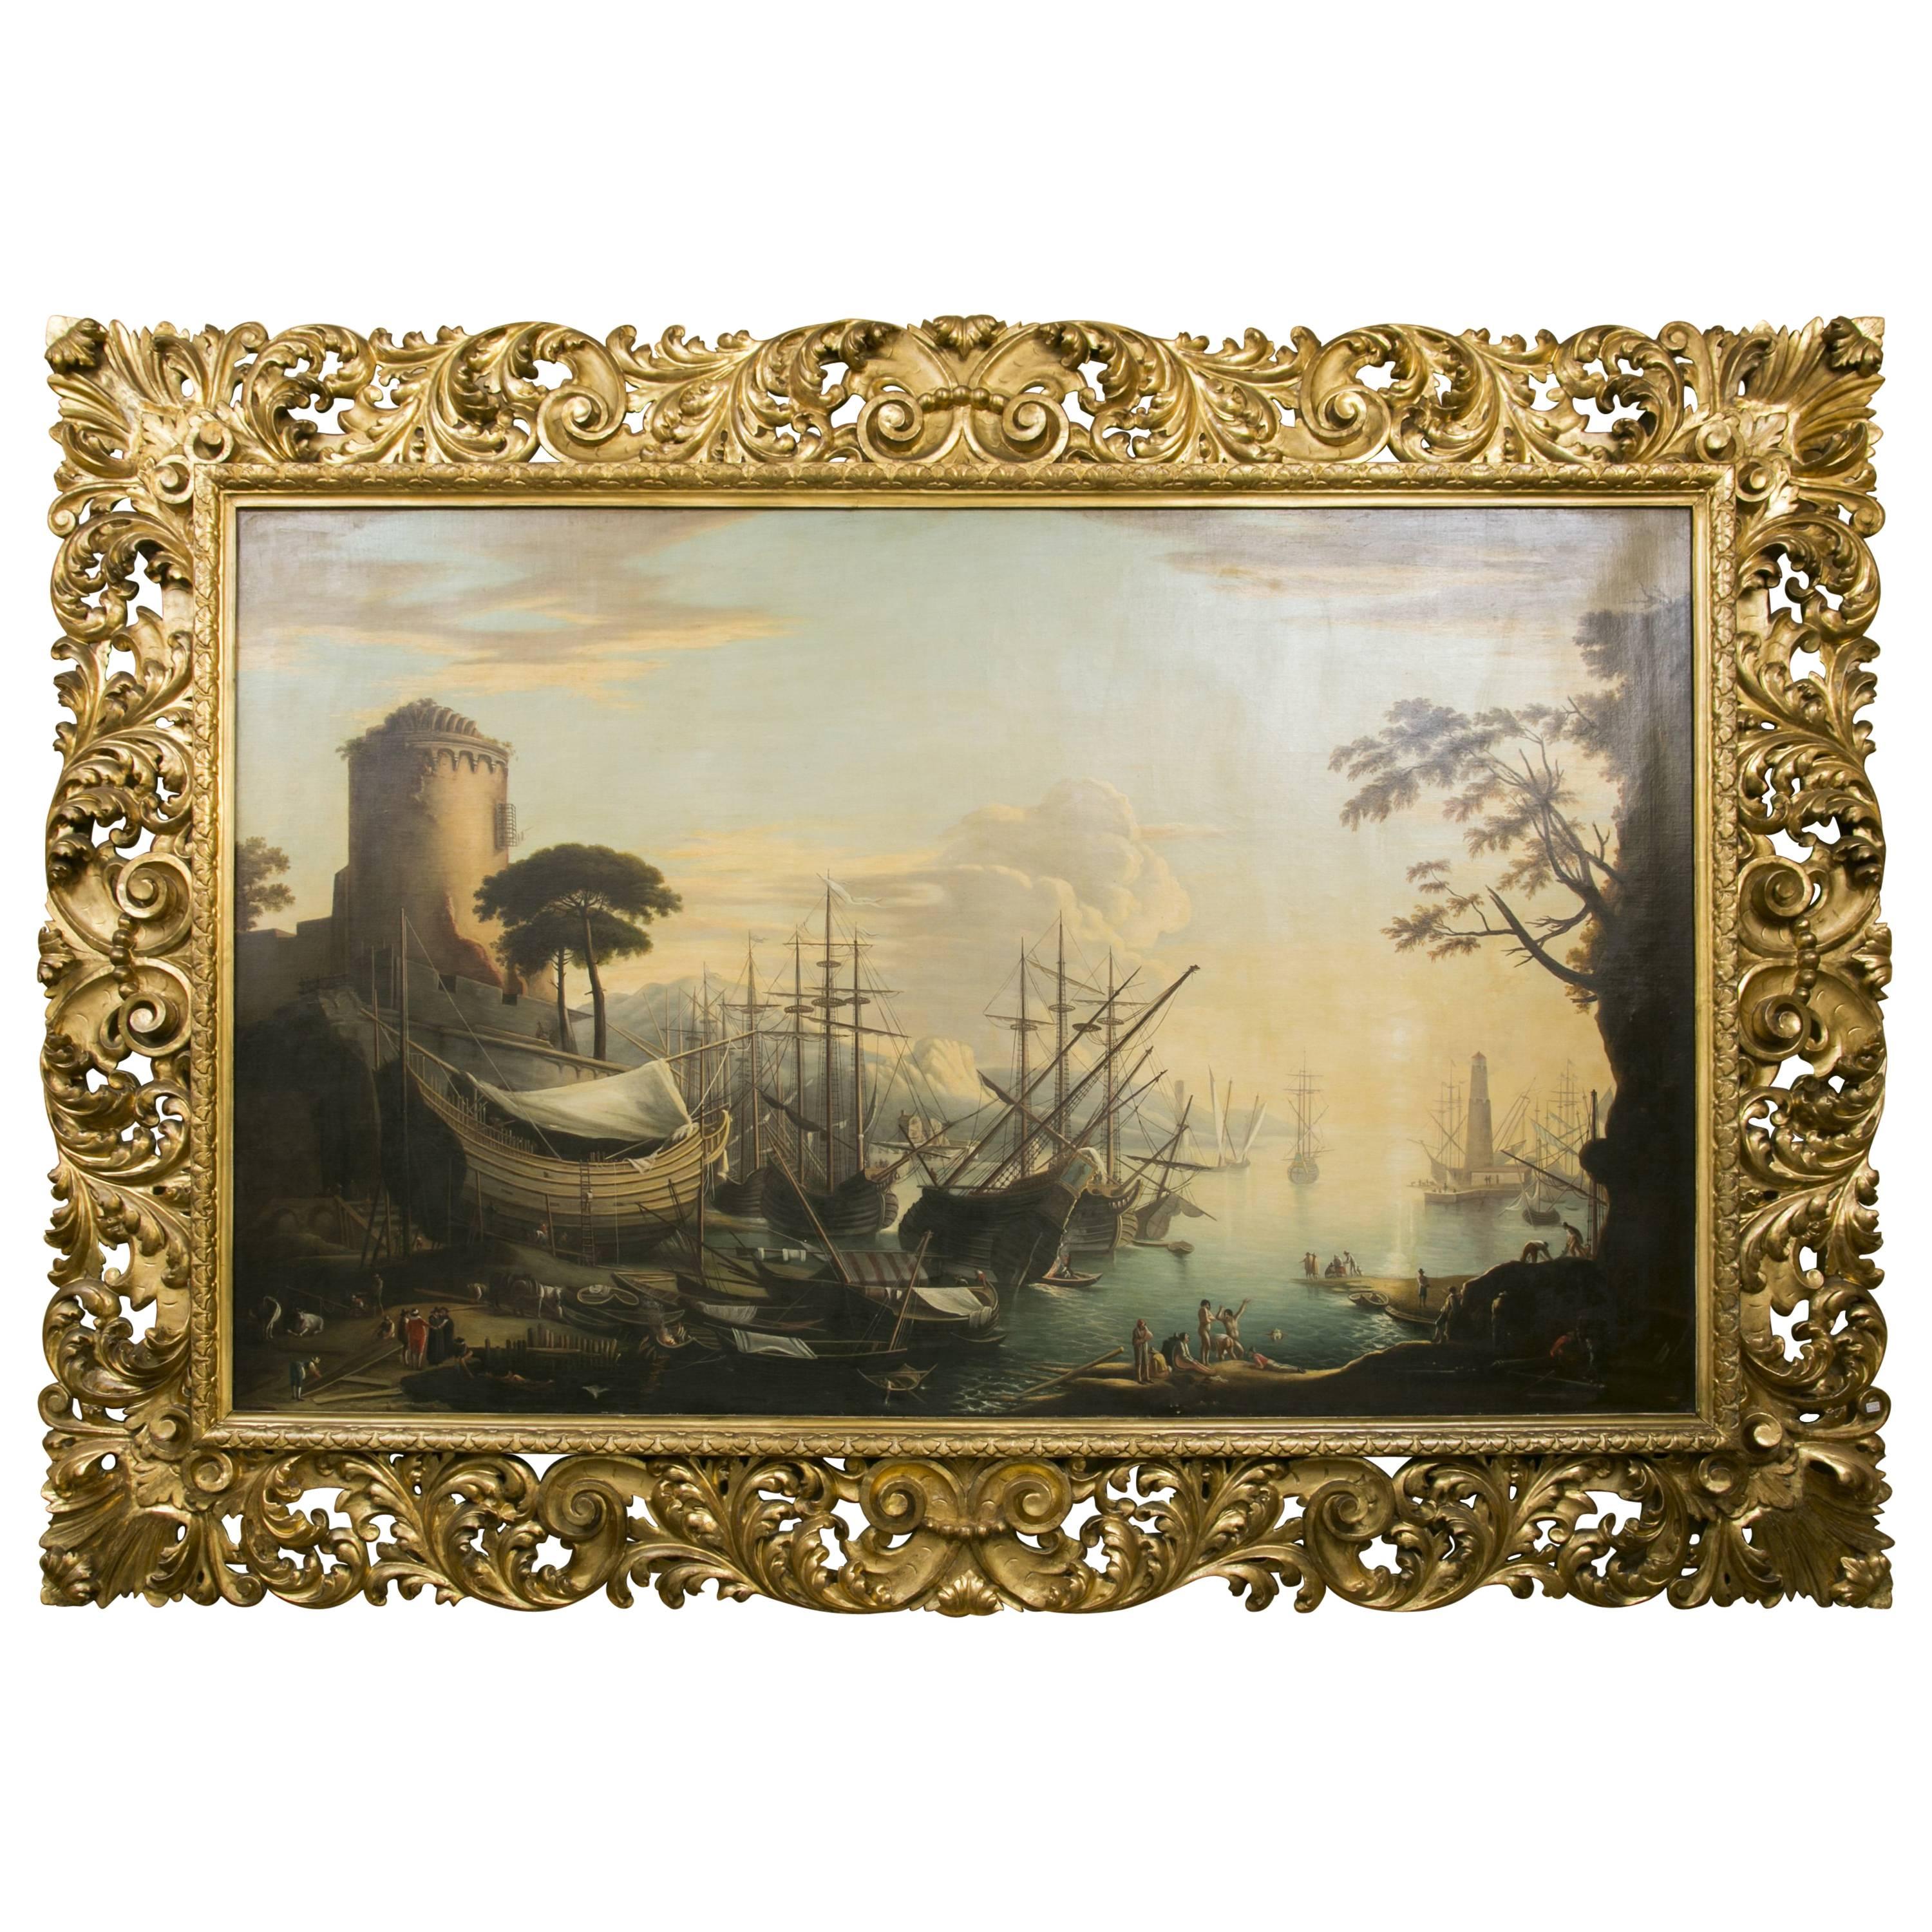 Very Large 19th Century Painting "Sailboats Docking in the Harbour" For Sale